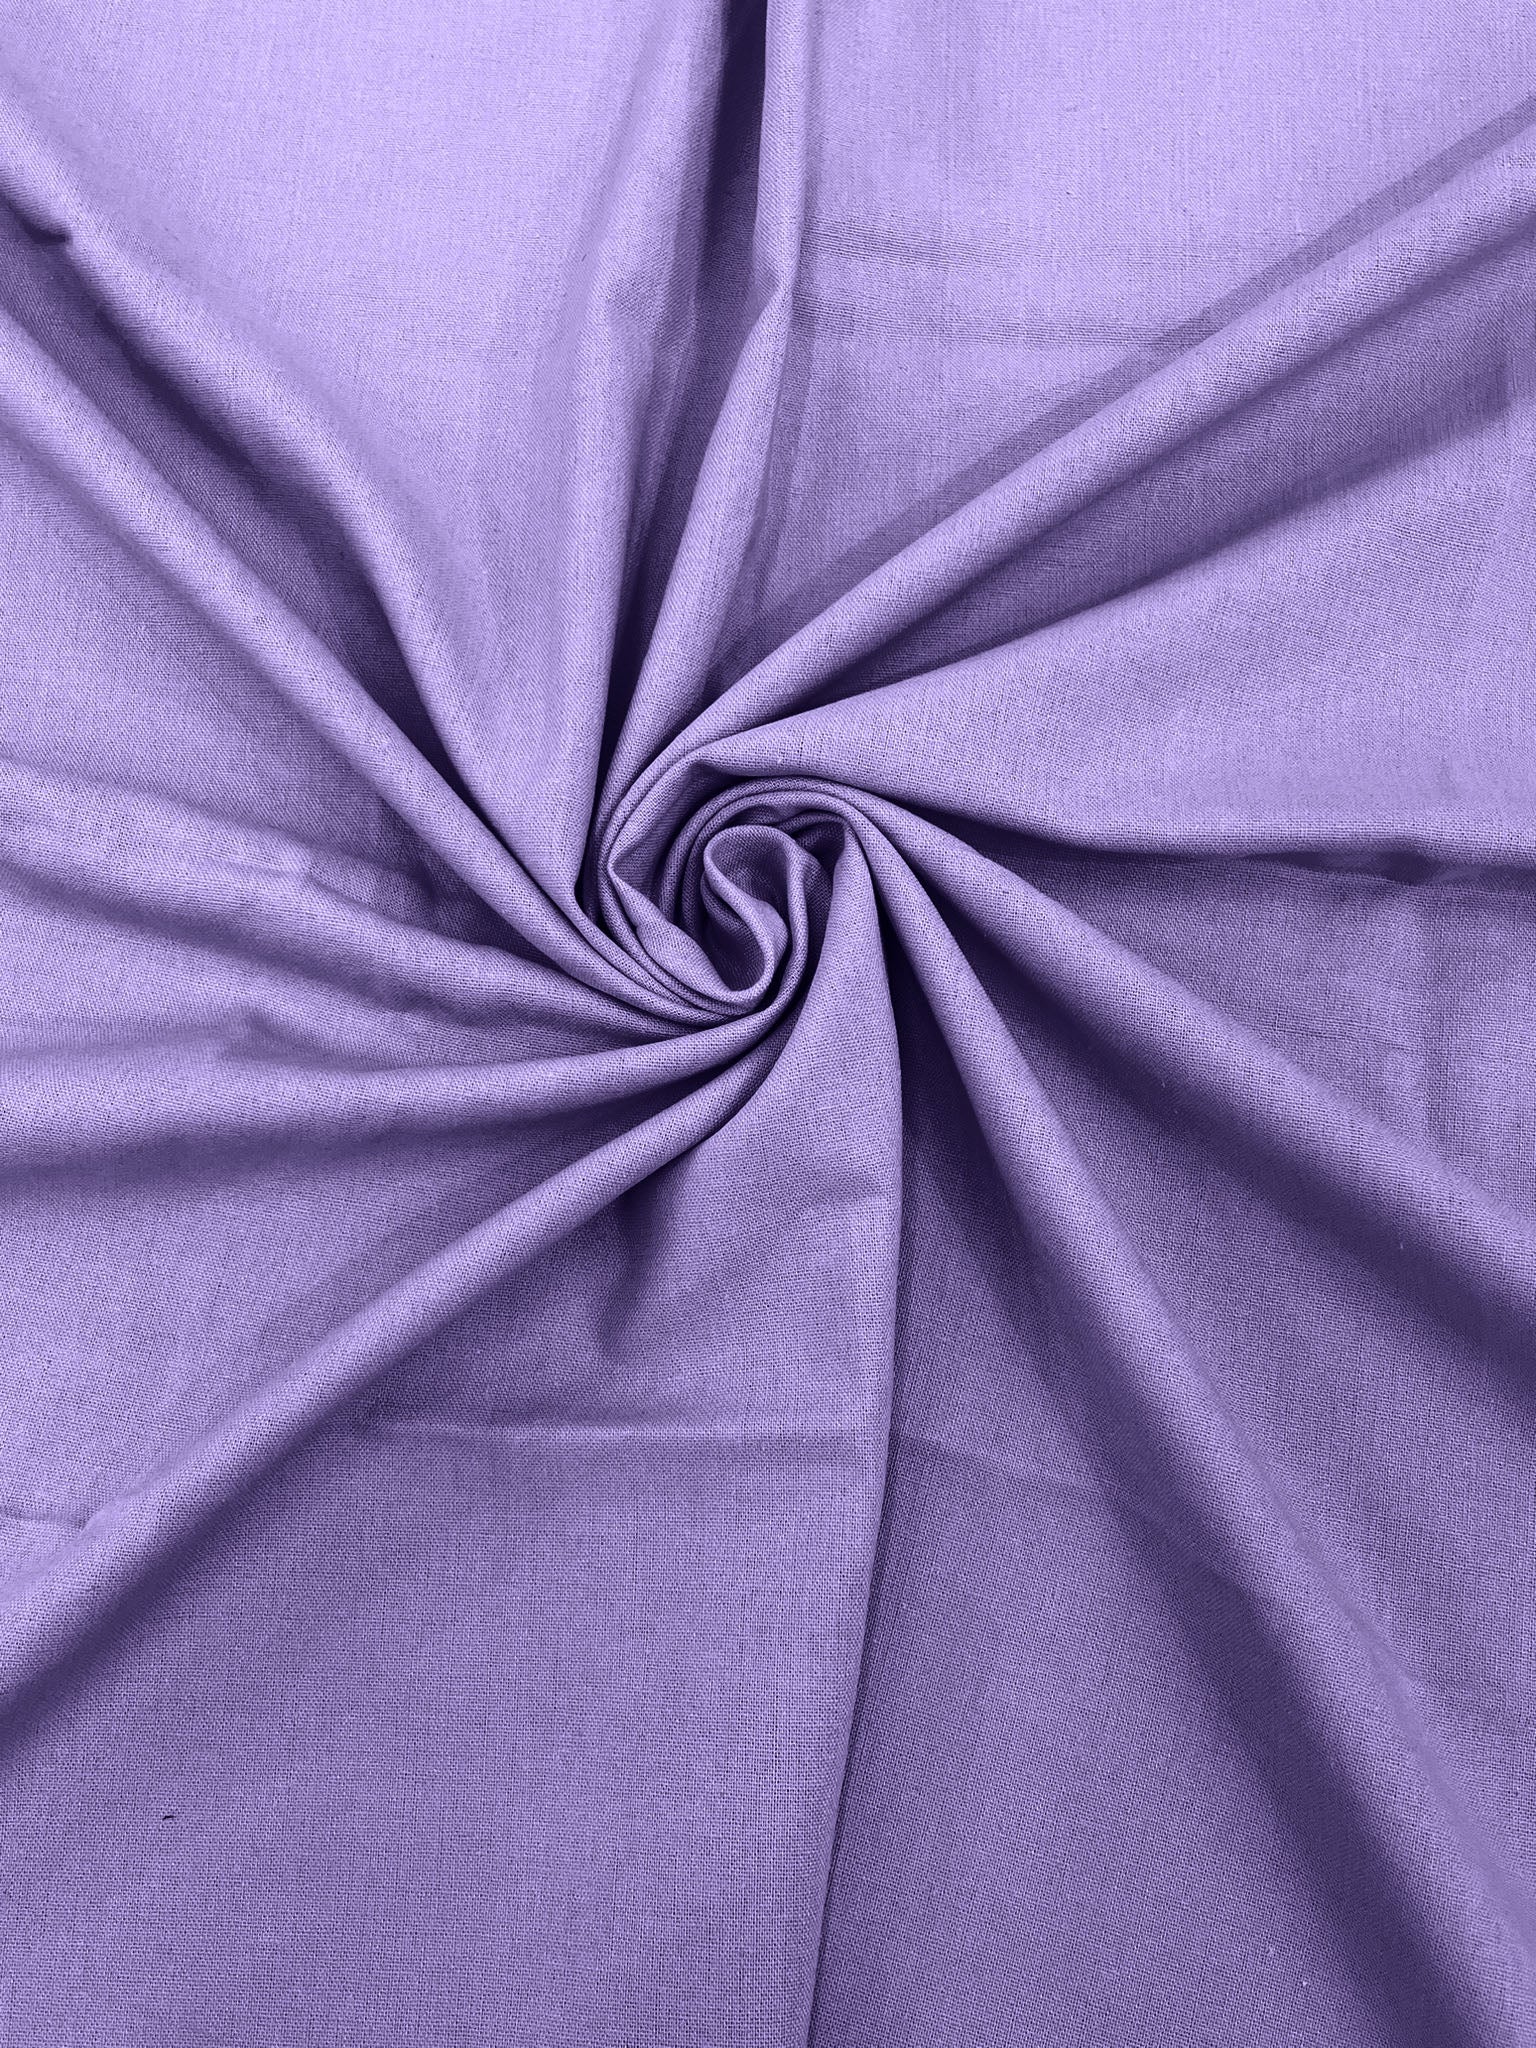 Lilac Medium Weight Natural Linen Fabric/50 " Wide/Clothing